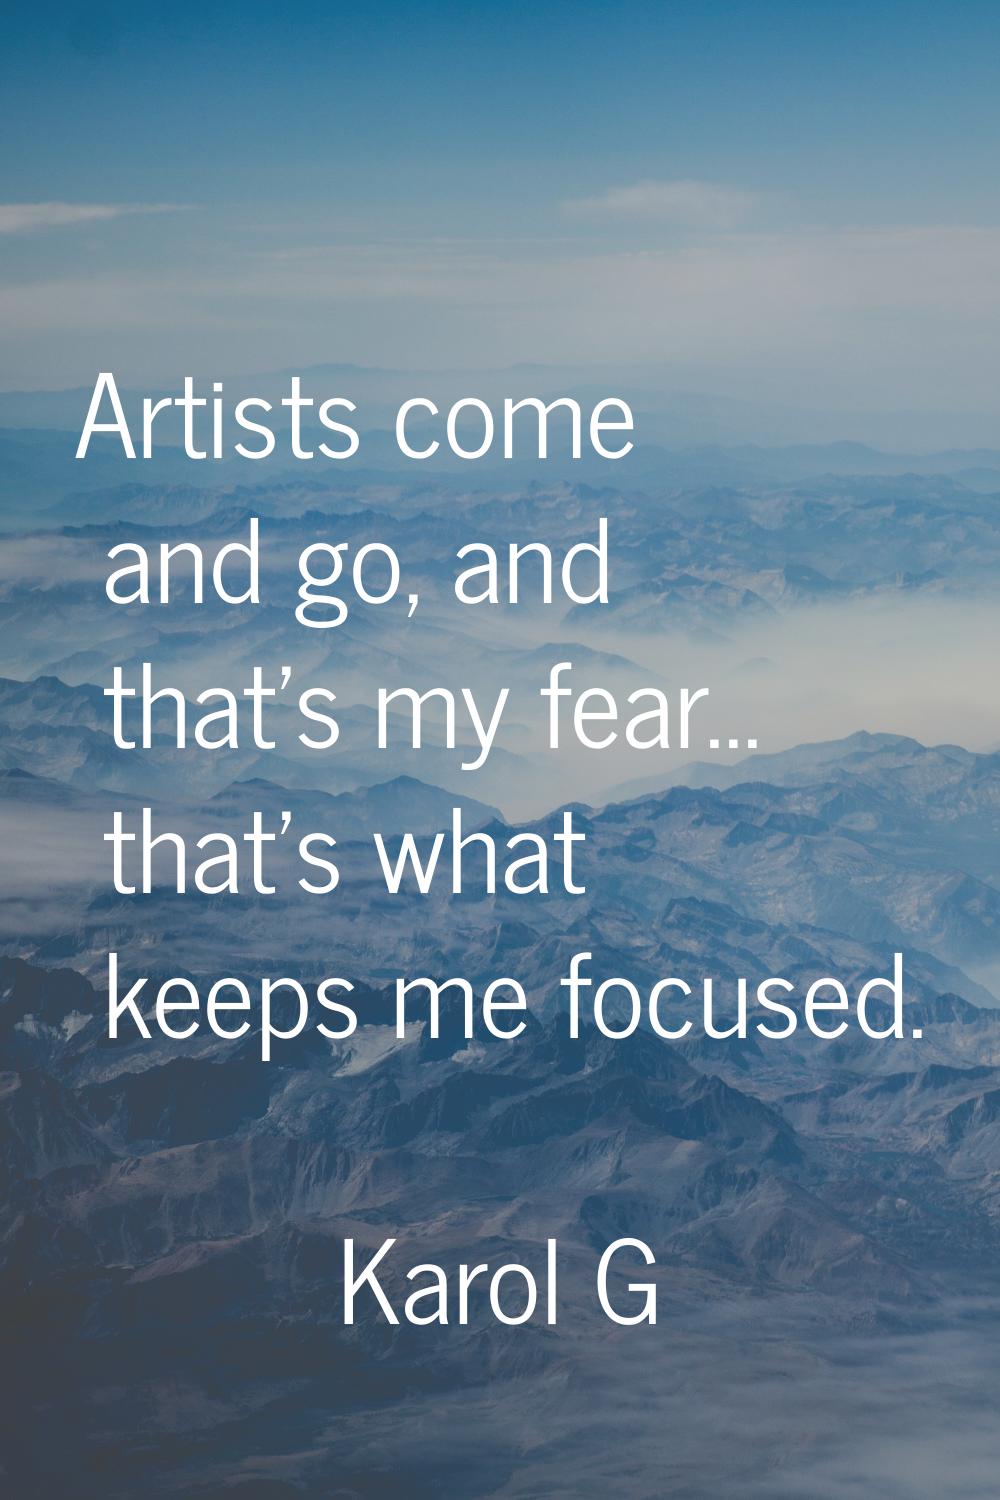 Artists come and go, and that's my fear... that's what keeps me focused.